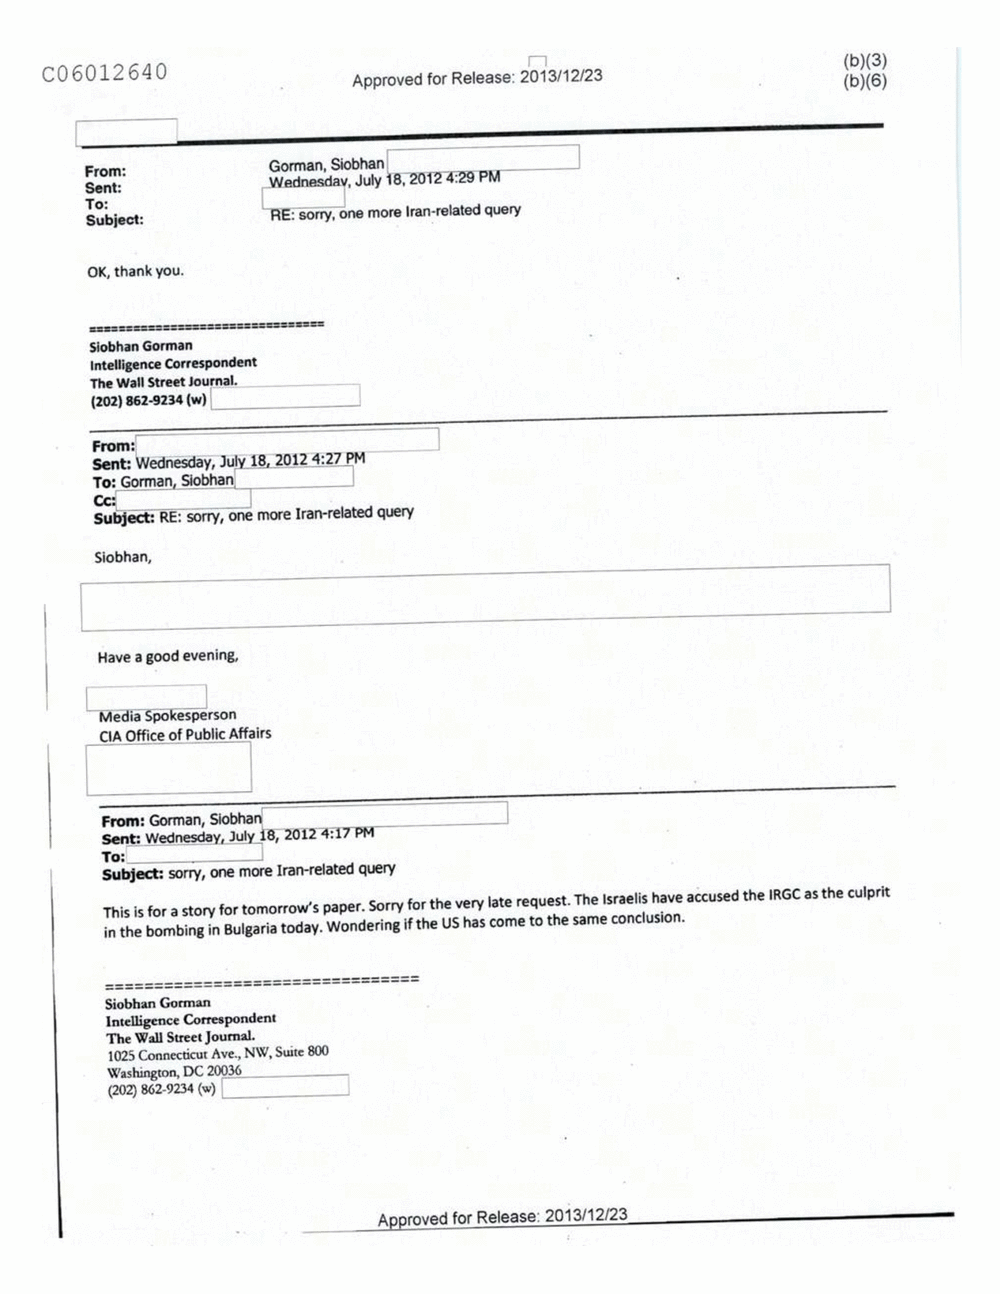 Page 206 from Email Correspondence Between Reporters and CIA Flacks